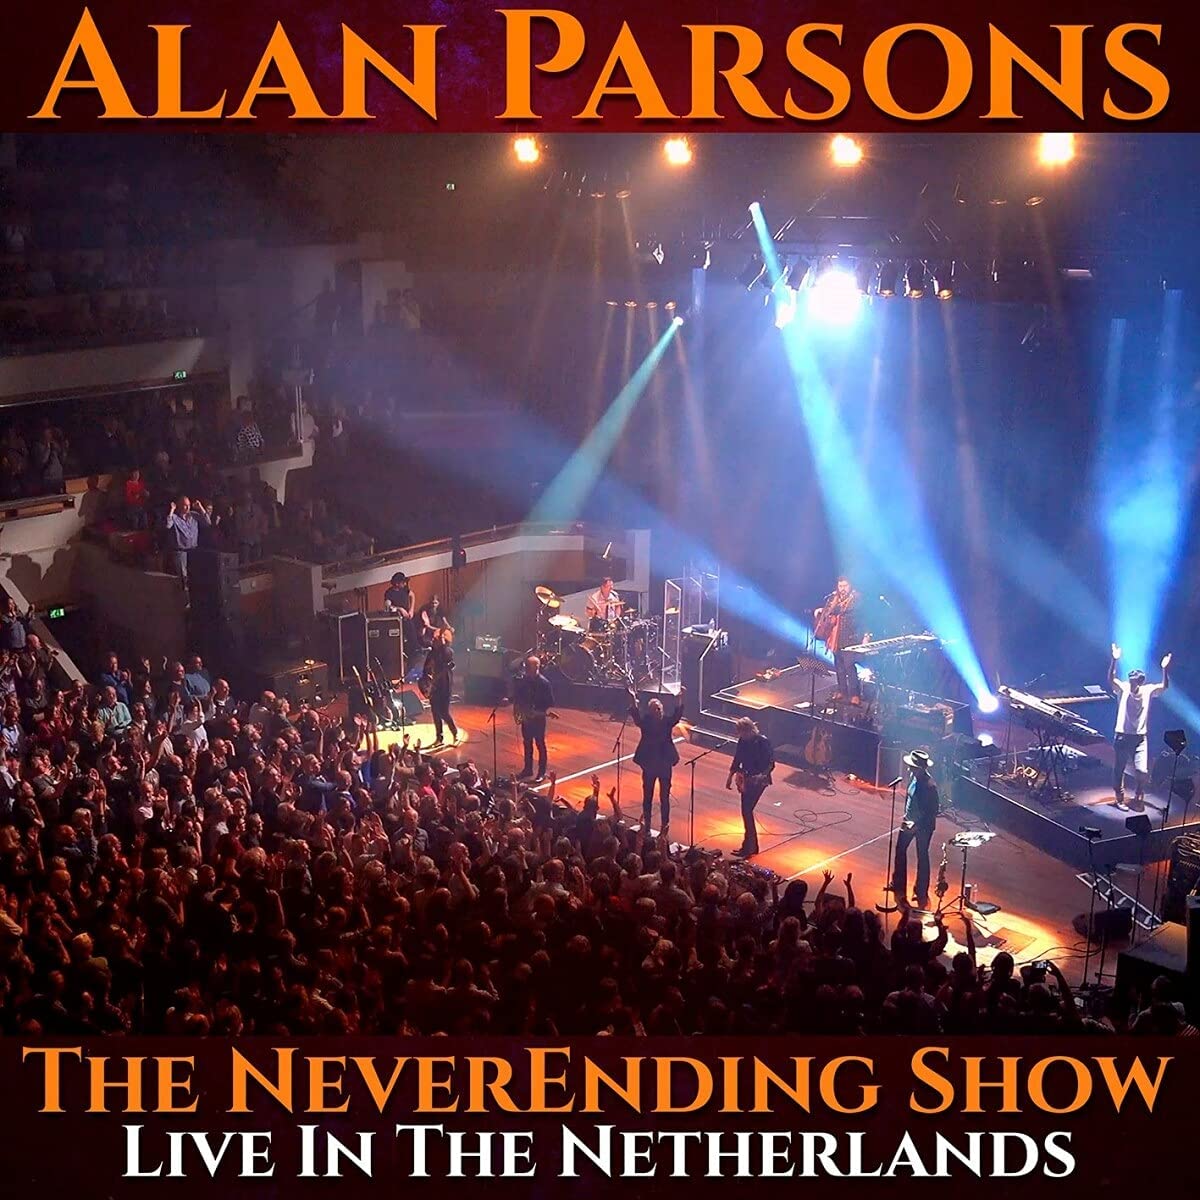 Alan Parsons - The Neverending Show: Live In The Netherlands - 2CD/DVD